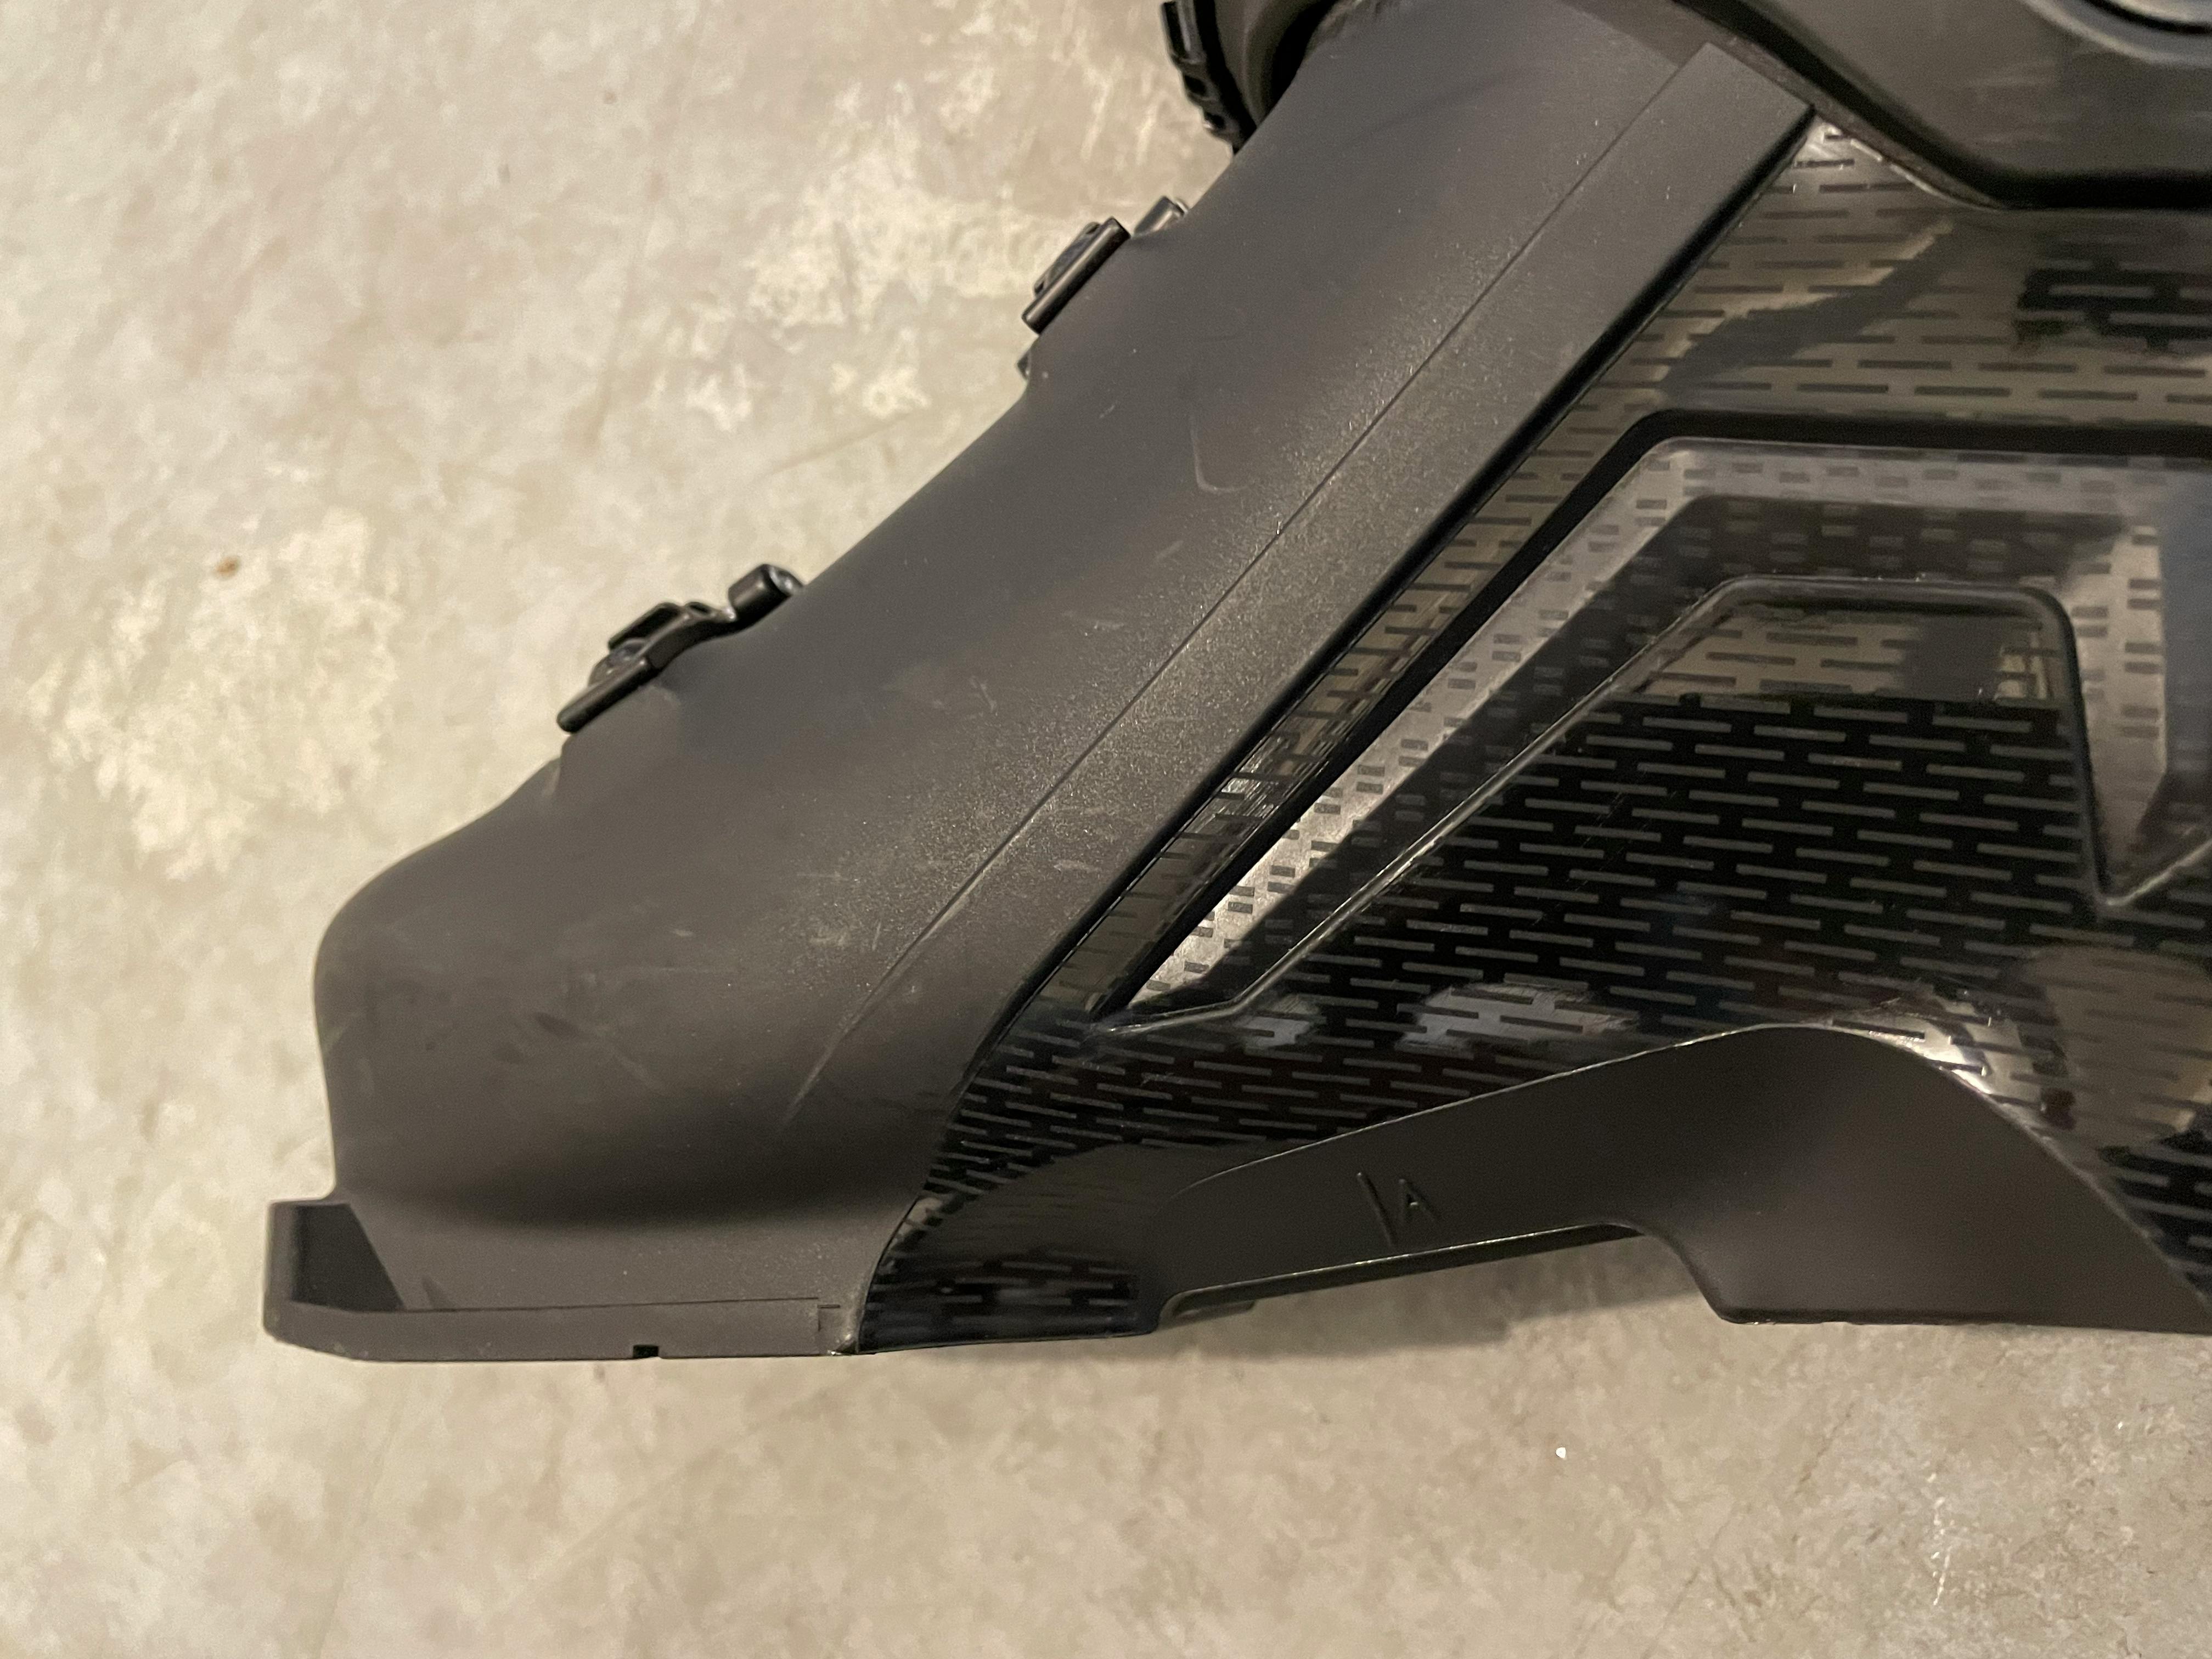 An image of the tip of the author's ski boot taken from the side.